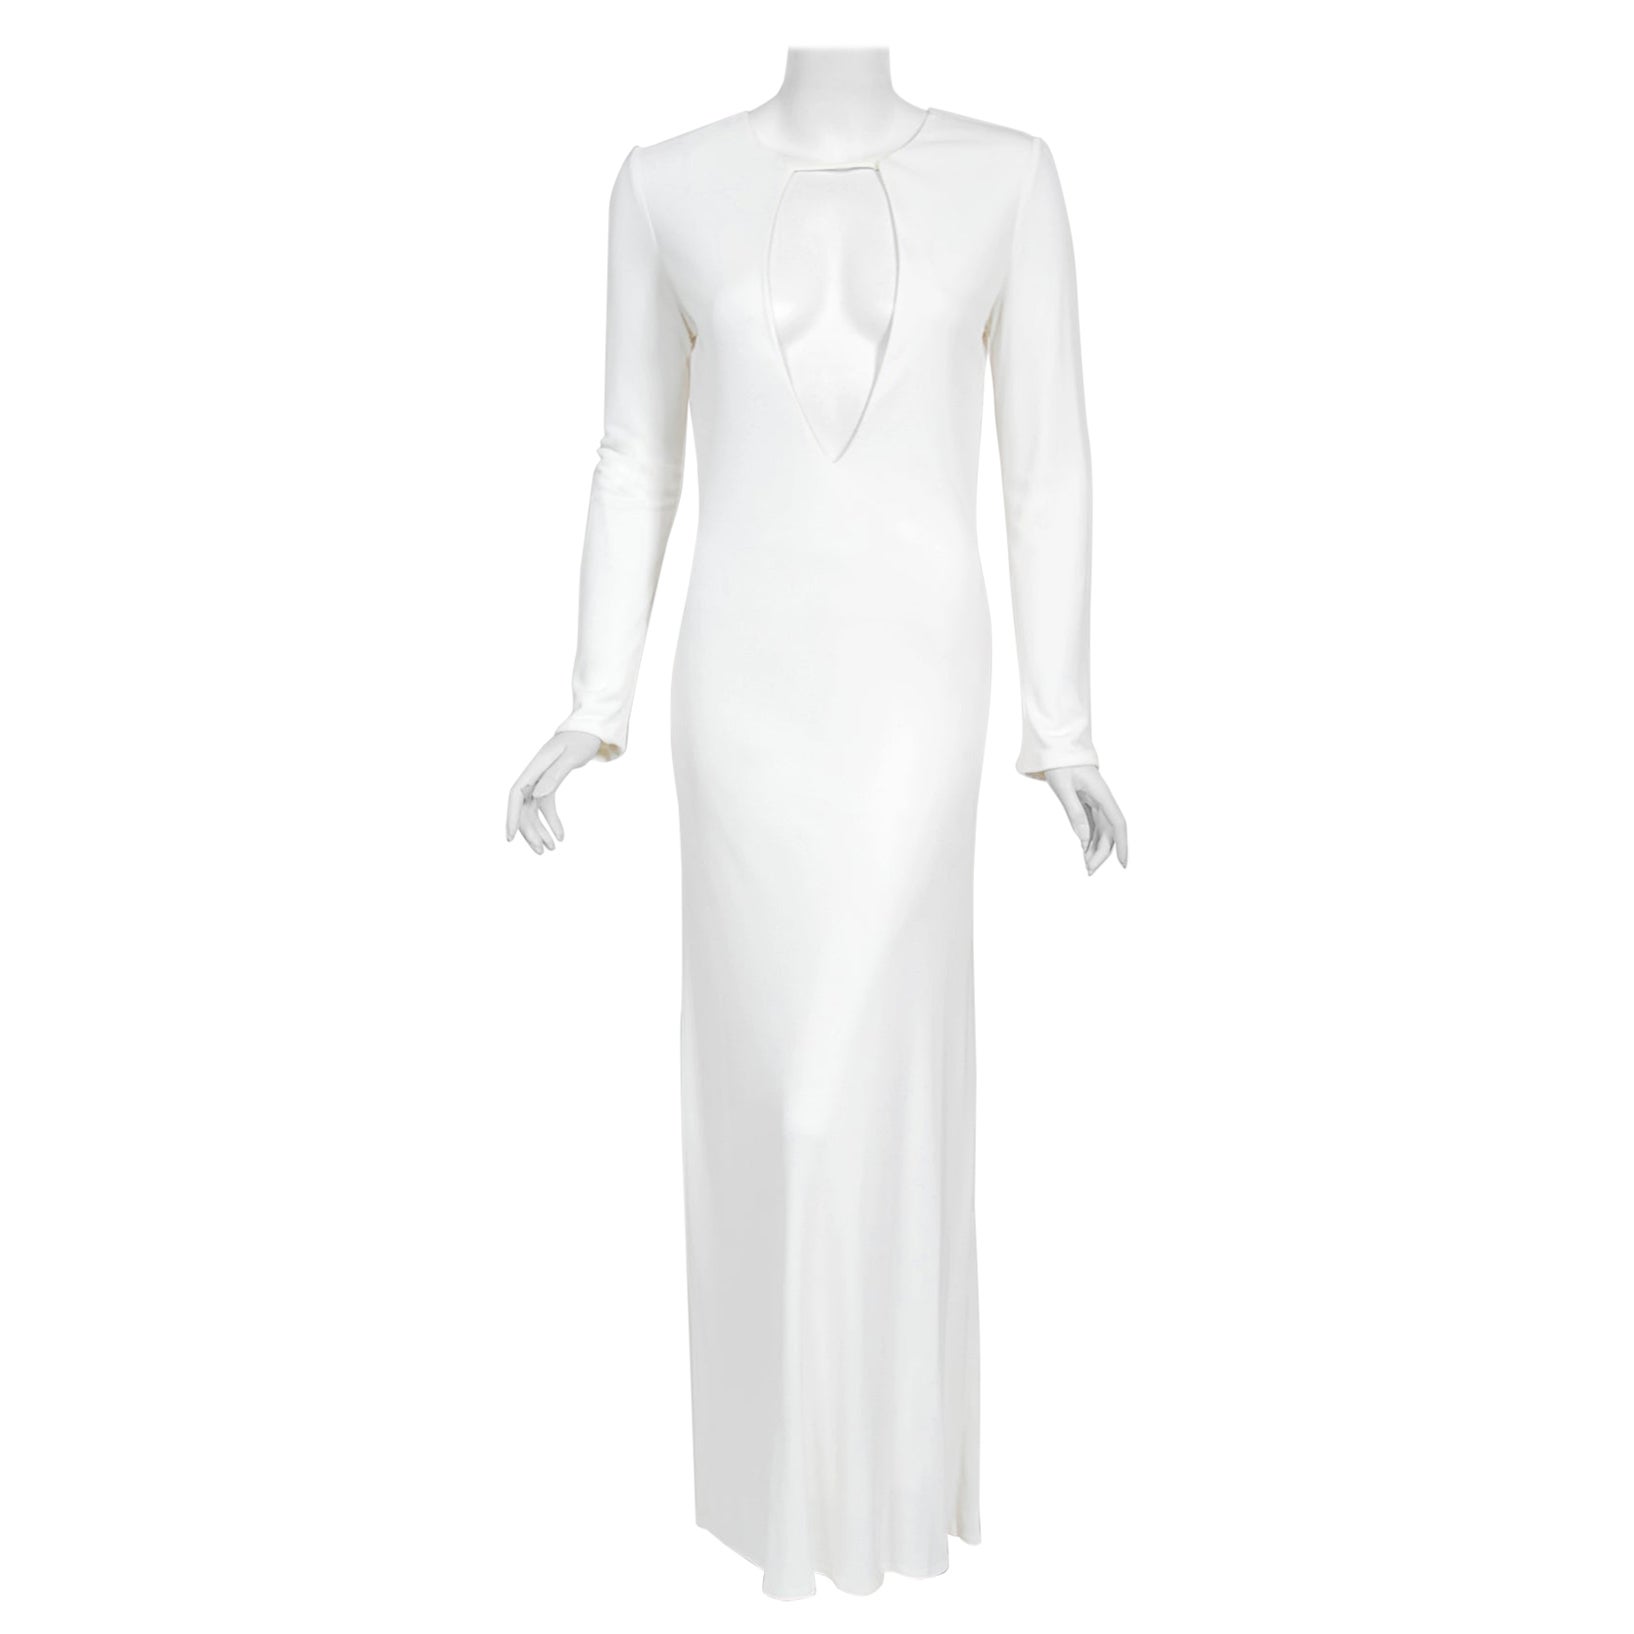 Vintage 1996 Gucci by Tom Ford Runway White Stretch Jersey Cut-Out Plunge Gown